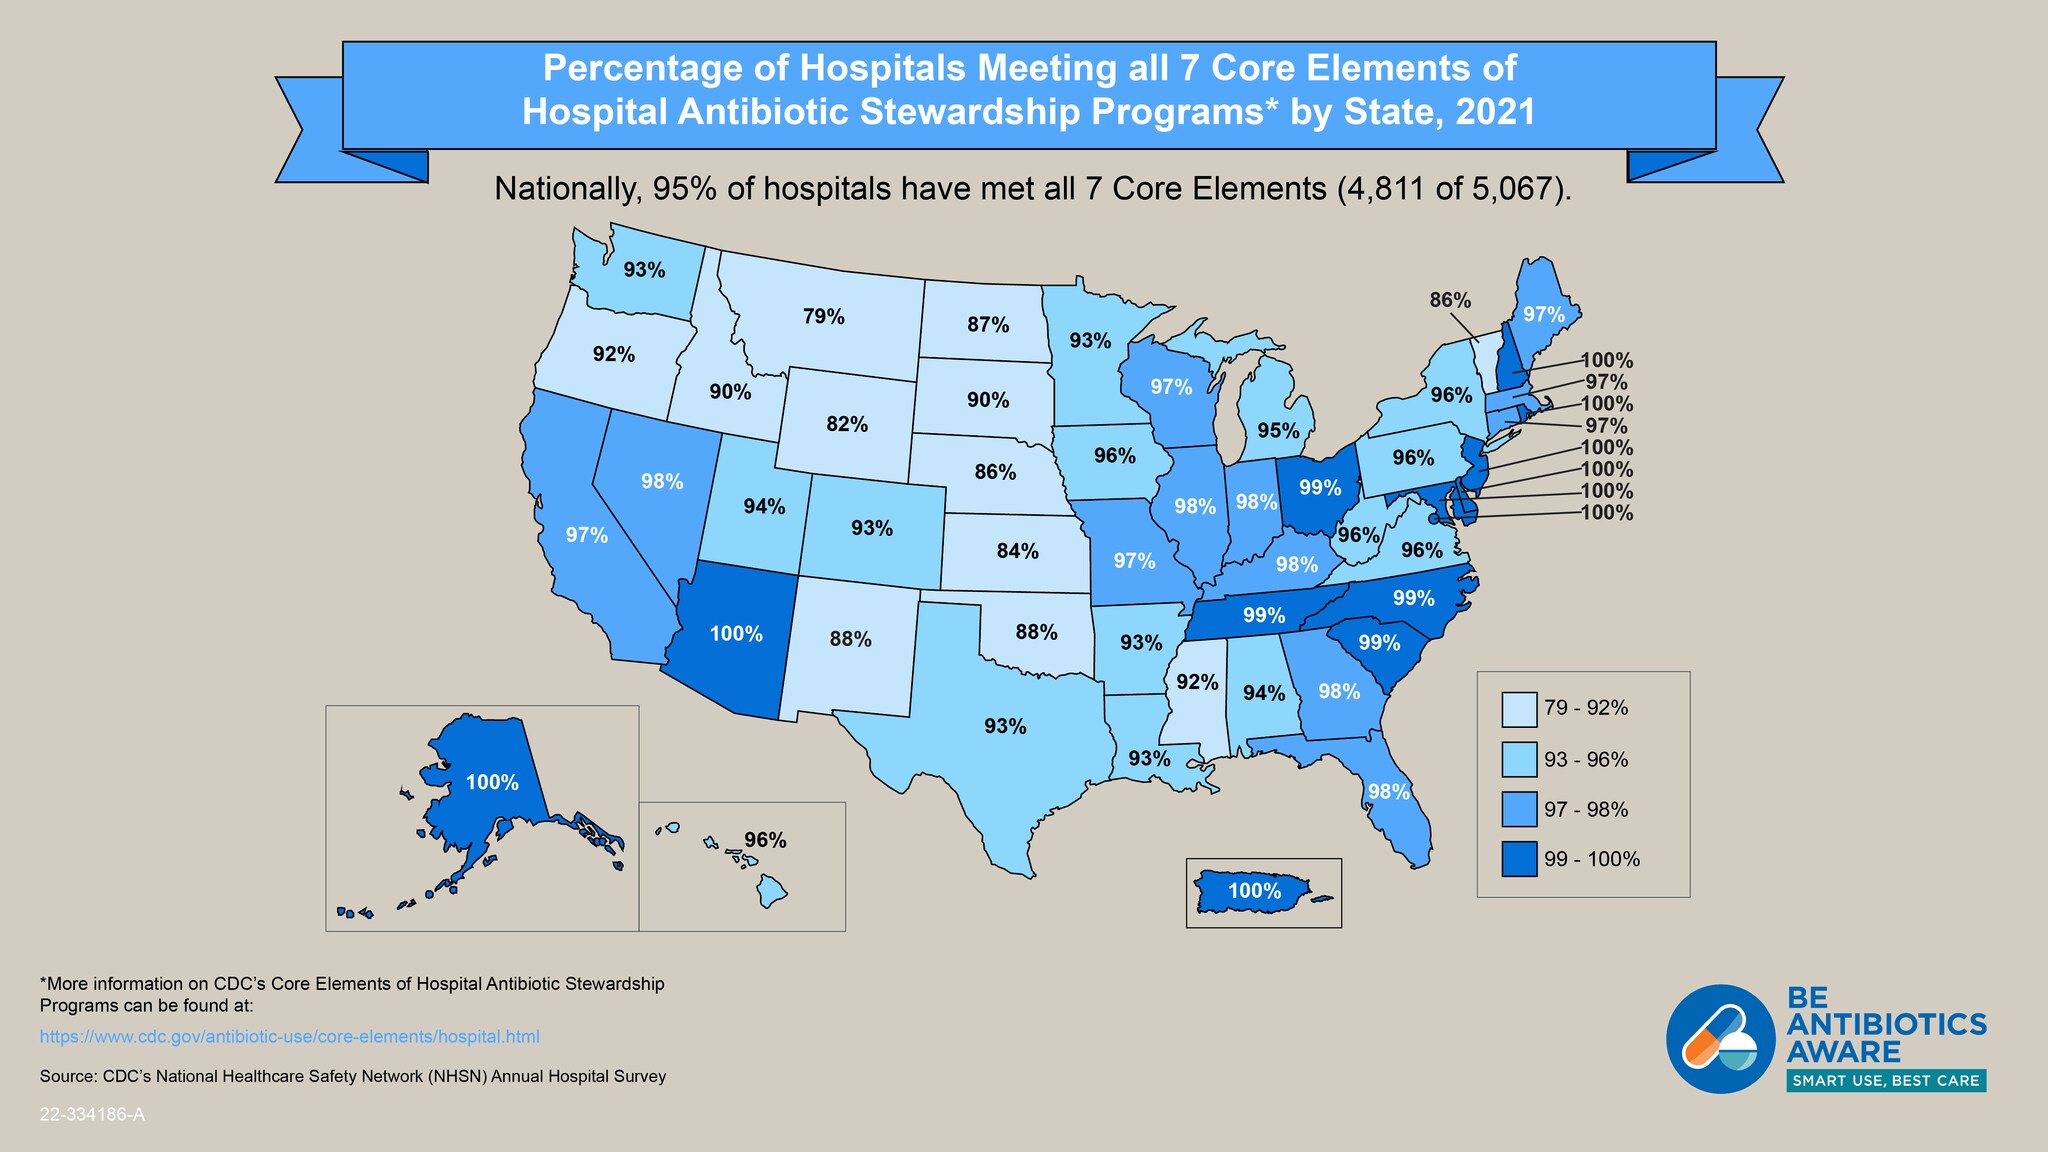 Core Elements of Hospital Antibiotic Stewardship Programs by State – 2021